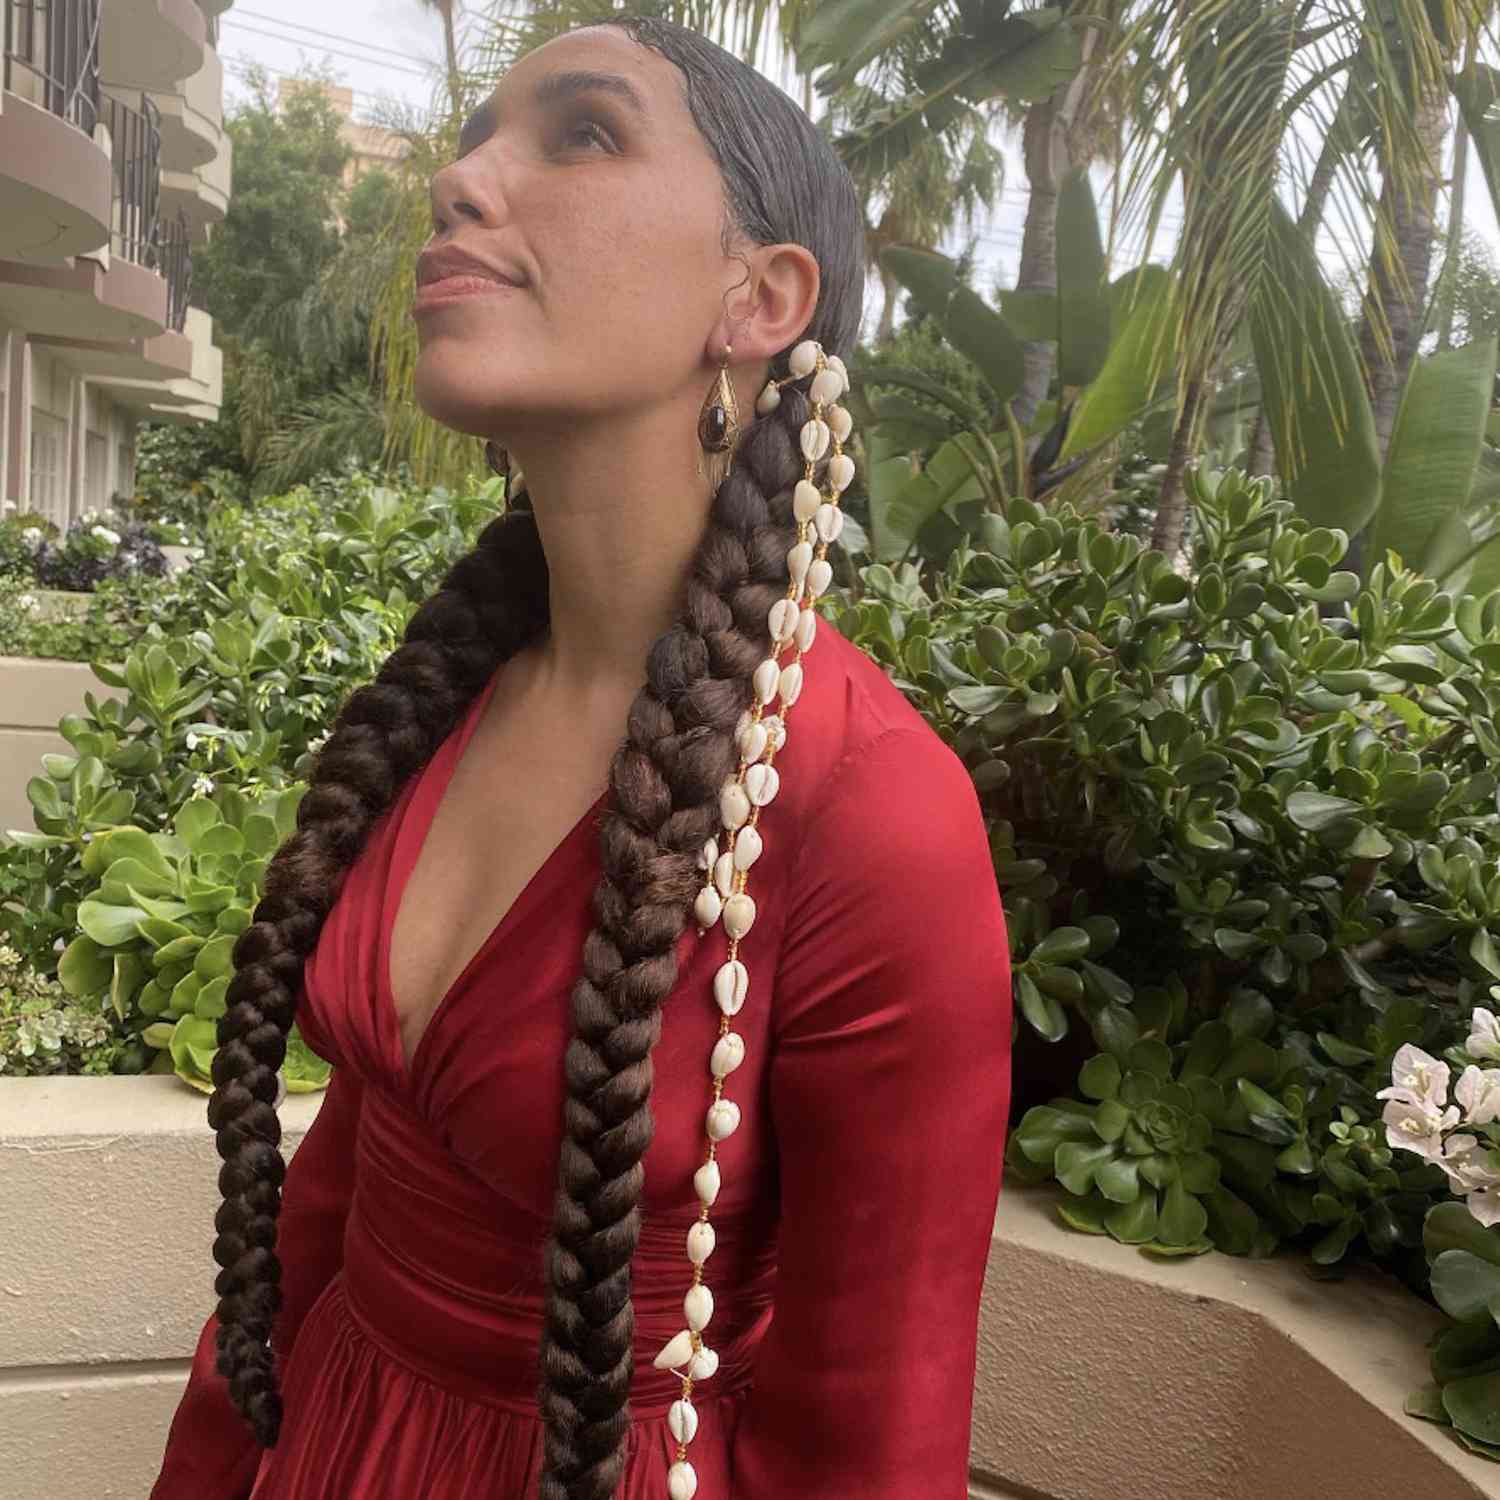 Woman with long braided hairstyle with shell accents